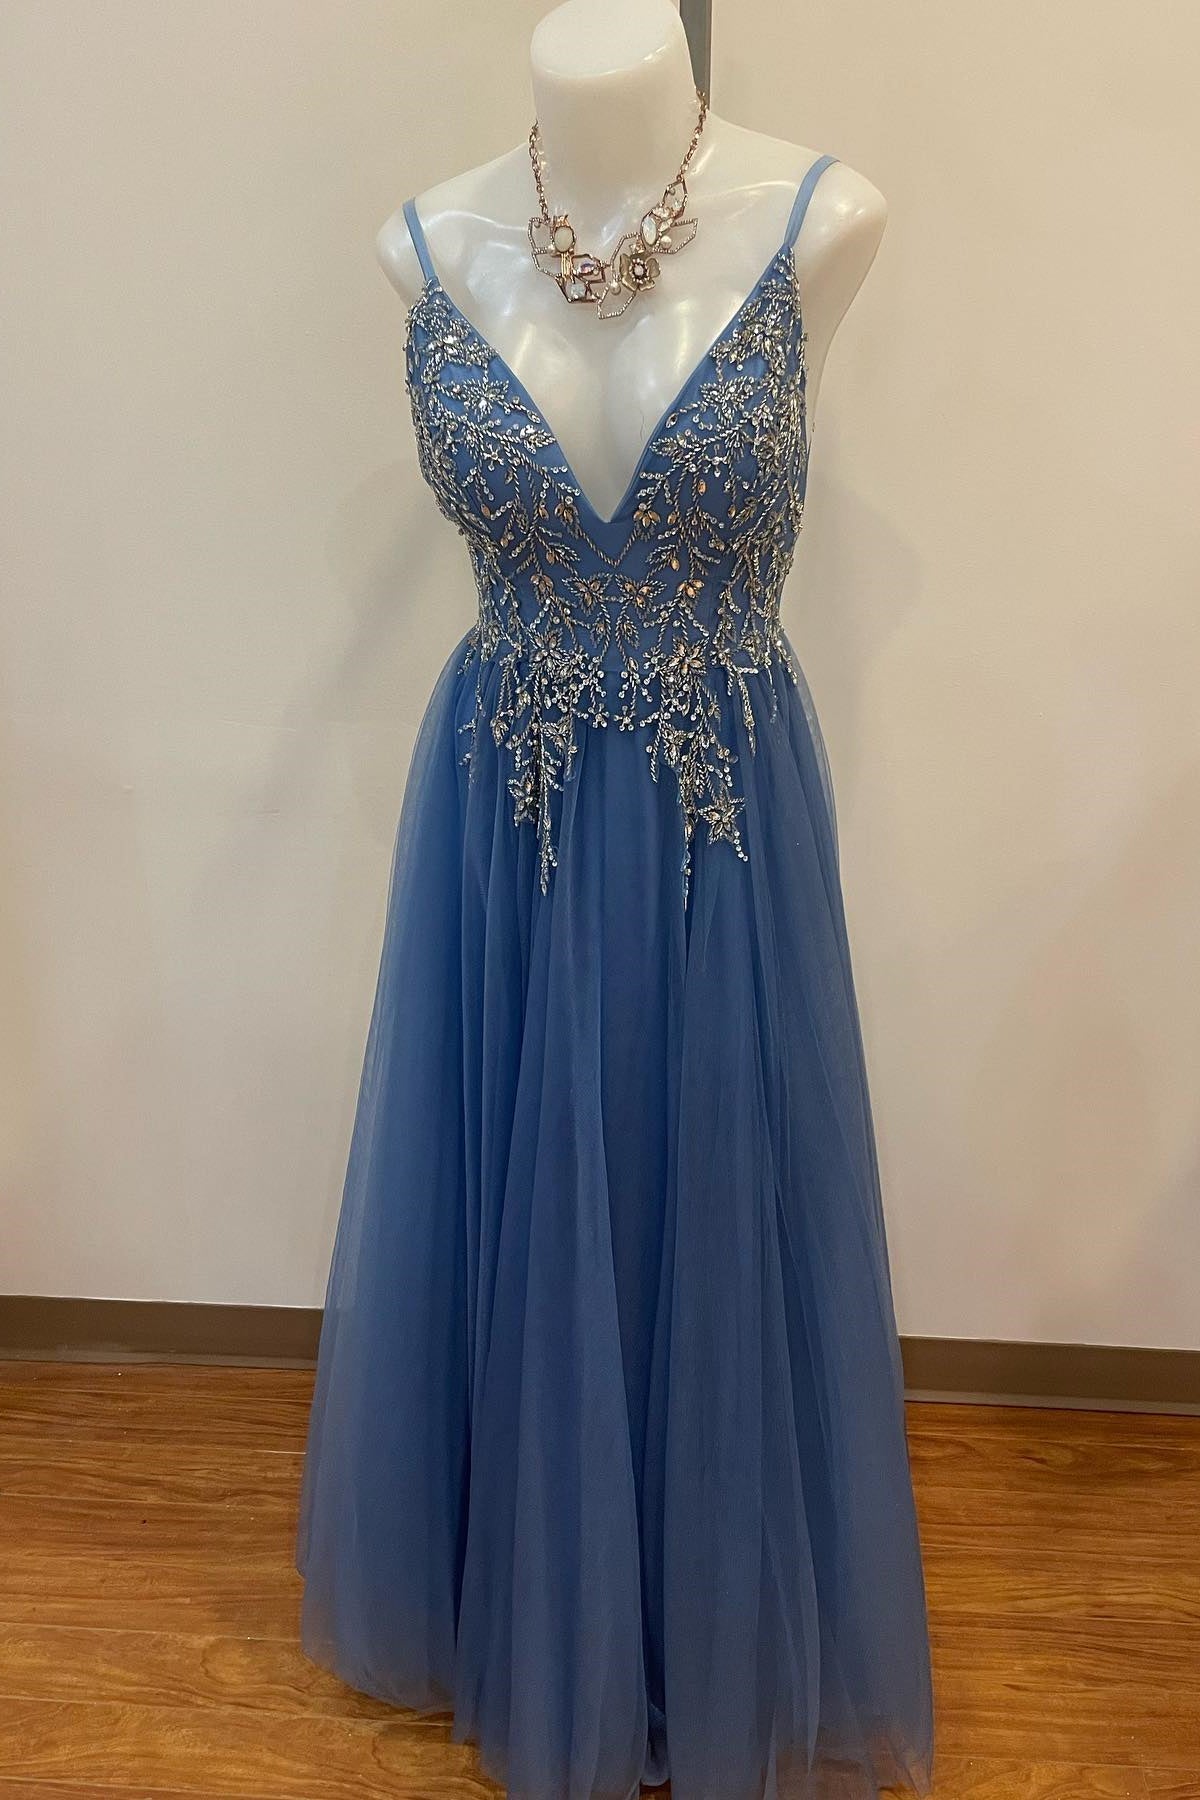 Party Dresses Shopping, Twilight V Neck Rhinestone-Embroidery Tulle Long Prom Dress